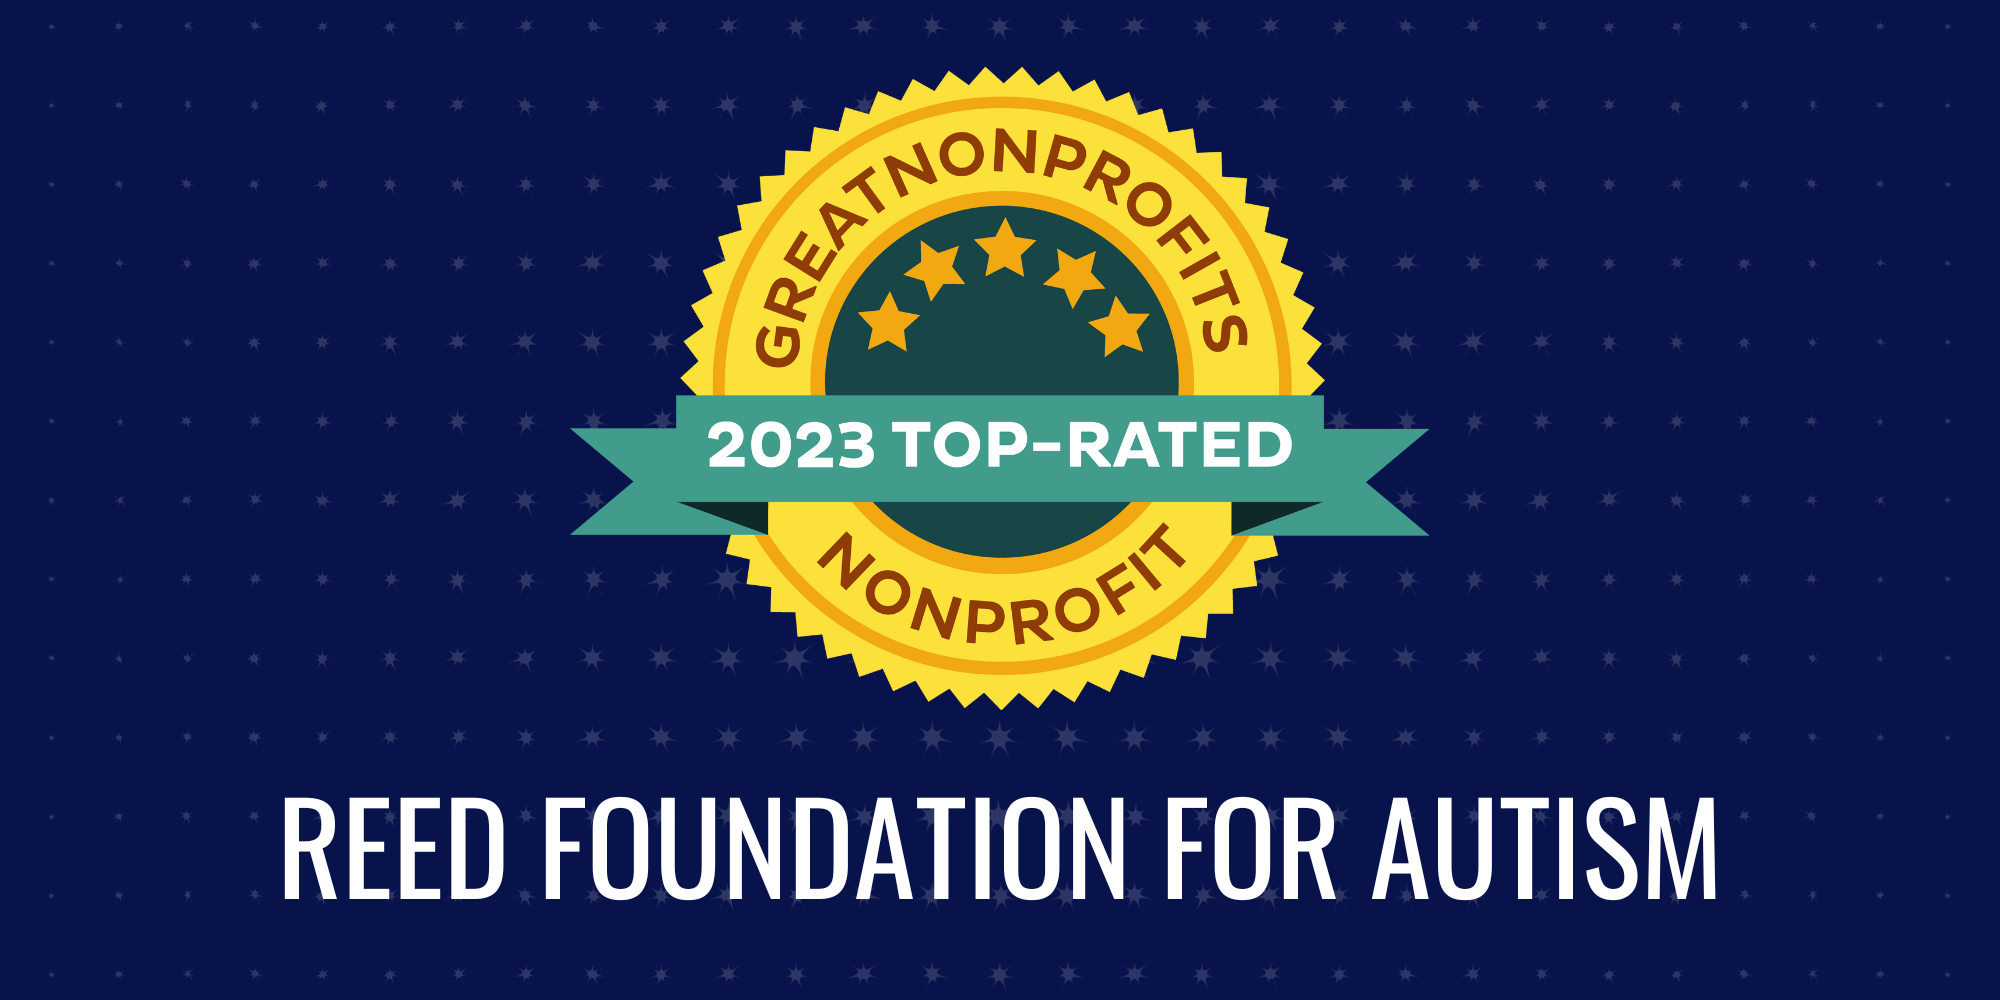 REED IS NAMED A “2023 TOP-RATED NONPROFIT” BY GREAT NONPROFITS – REED  Autism Services